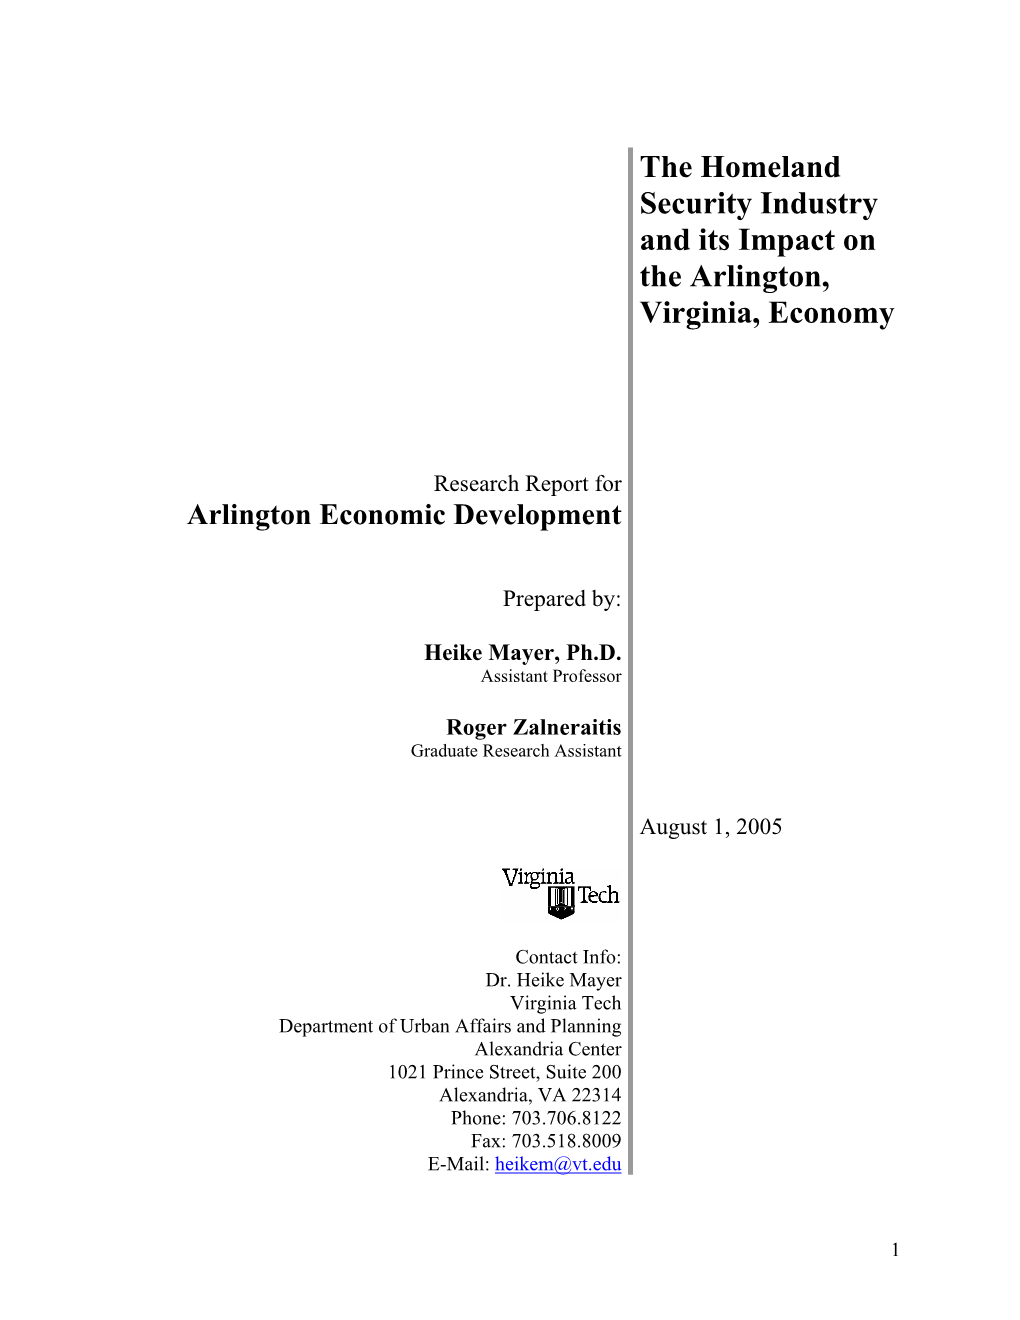 The Homeland Security Industry and Its Impact on the Arlington, Virginia, Economy